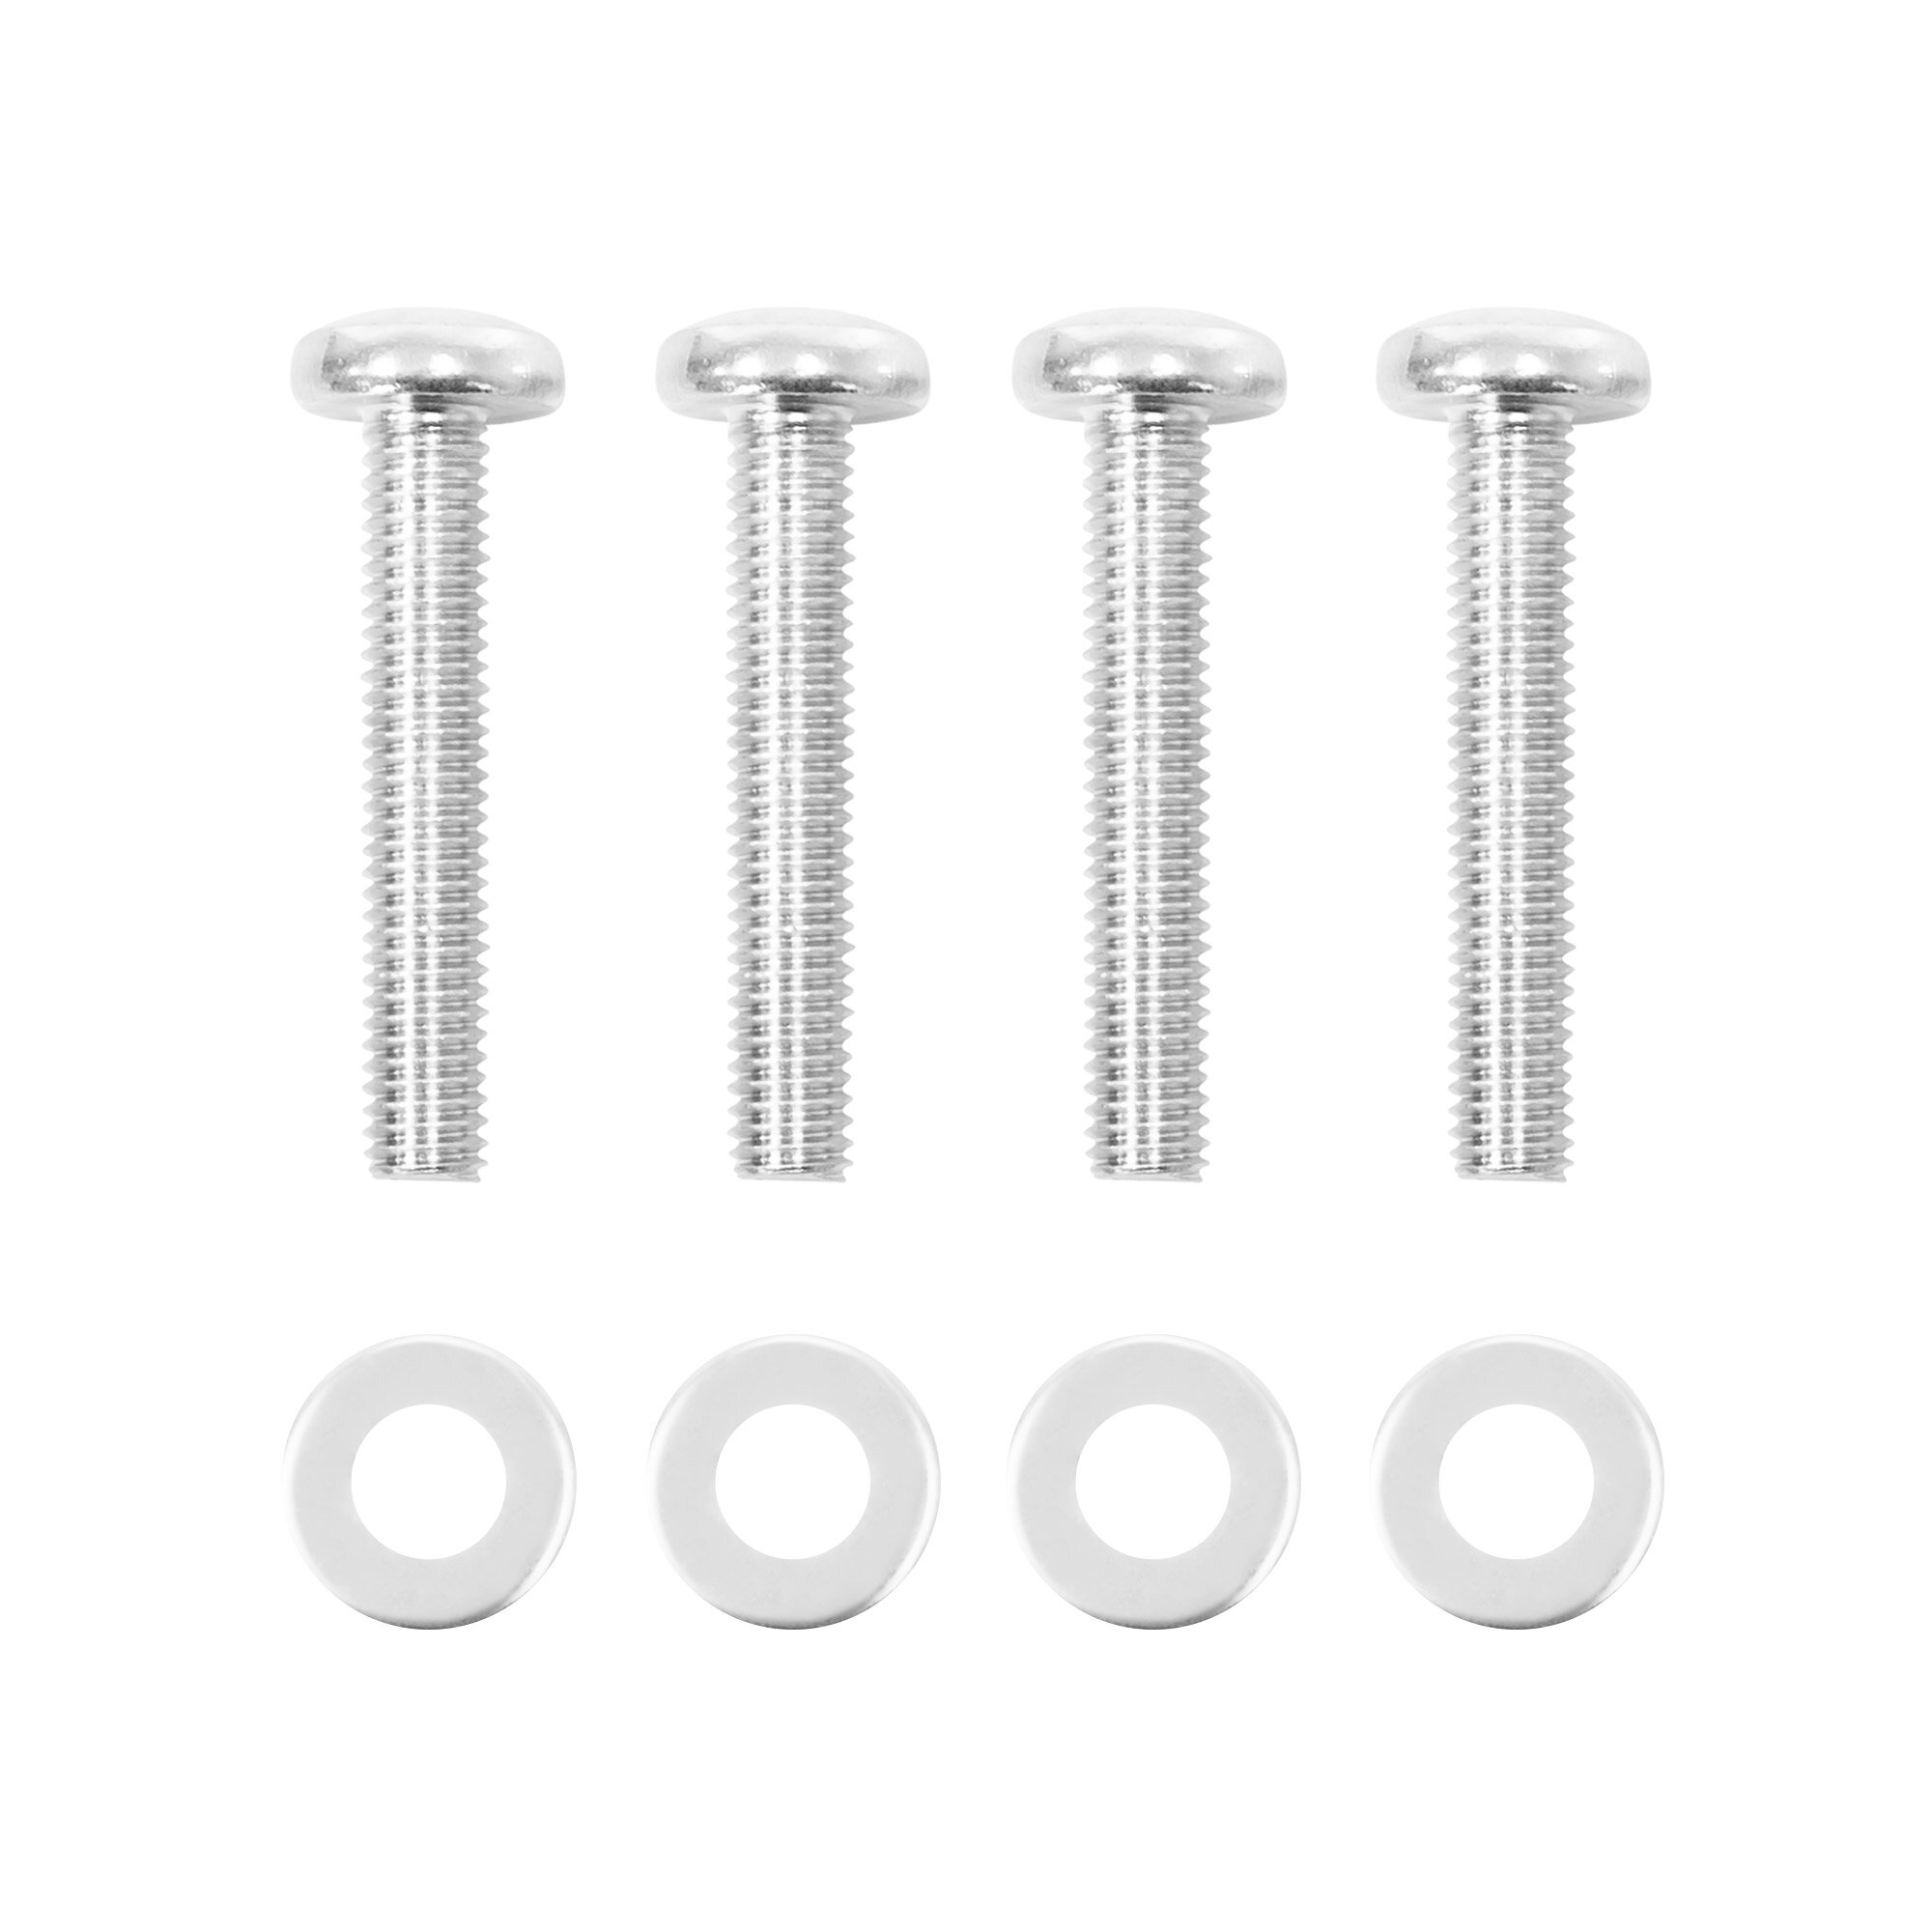 Mount-It! M8 Screws for Samsung TV, Stainless Steel Bolts for Wall  Mounting, M8 x 45mm, Pitch 1.25mm